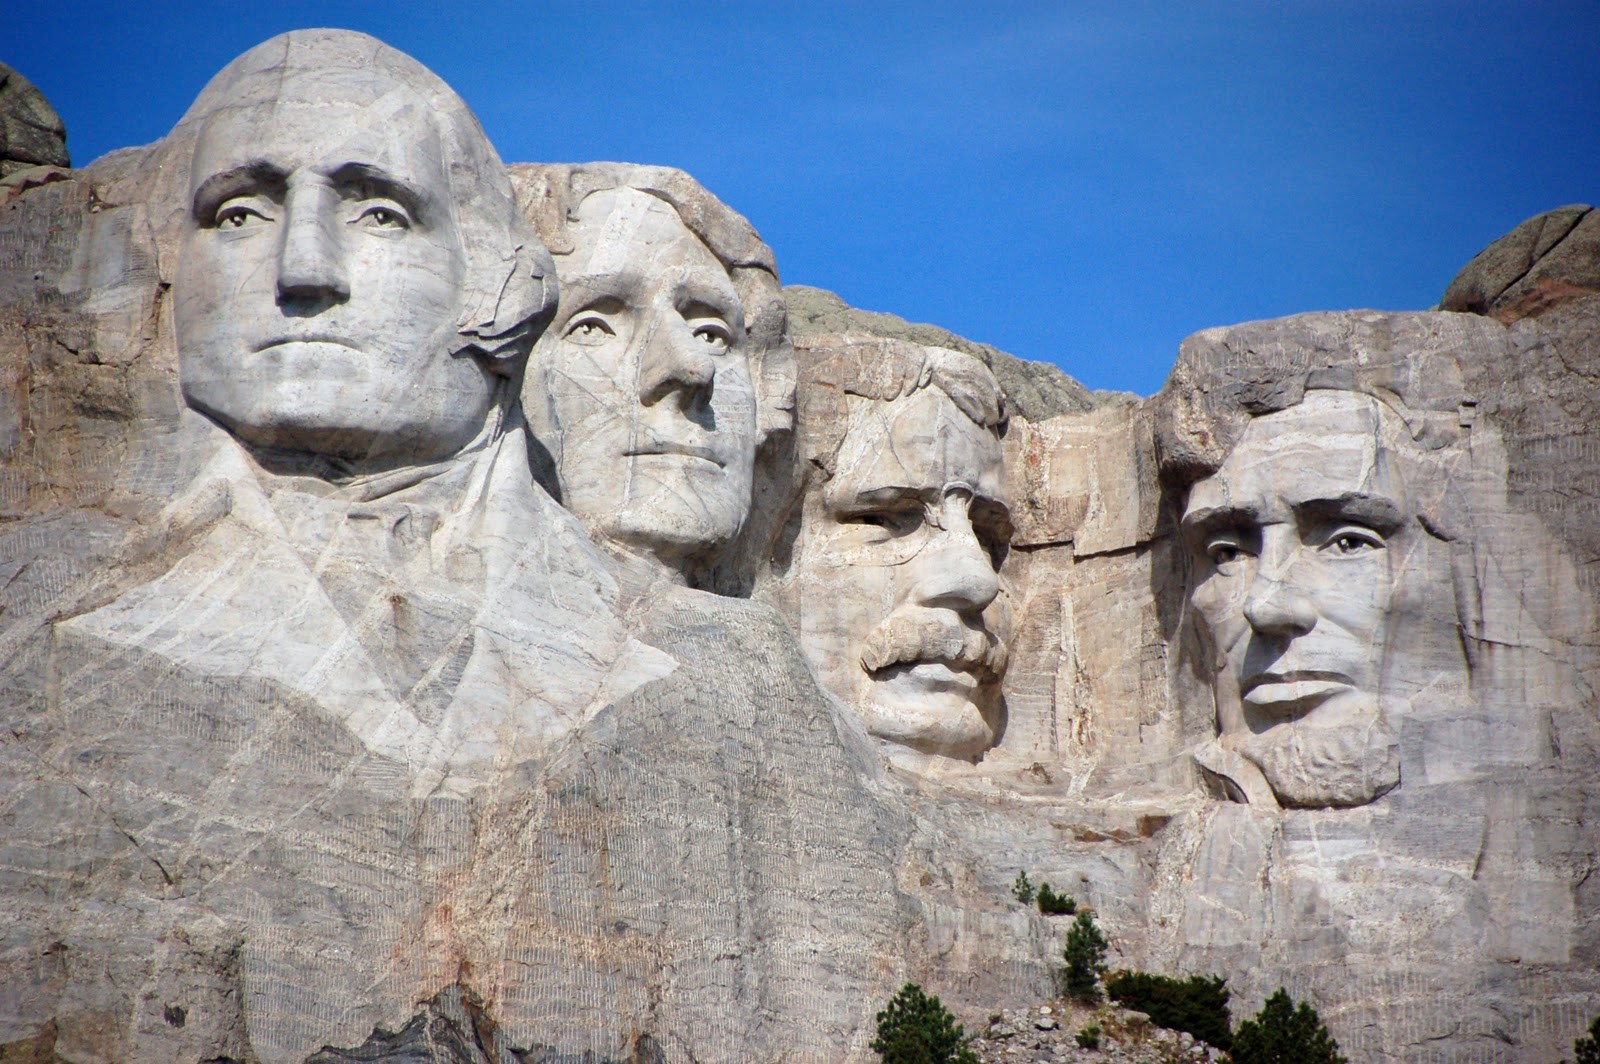 States And Capitals Quiz Presidents Day, Mount Rushmore, South Dakota